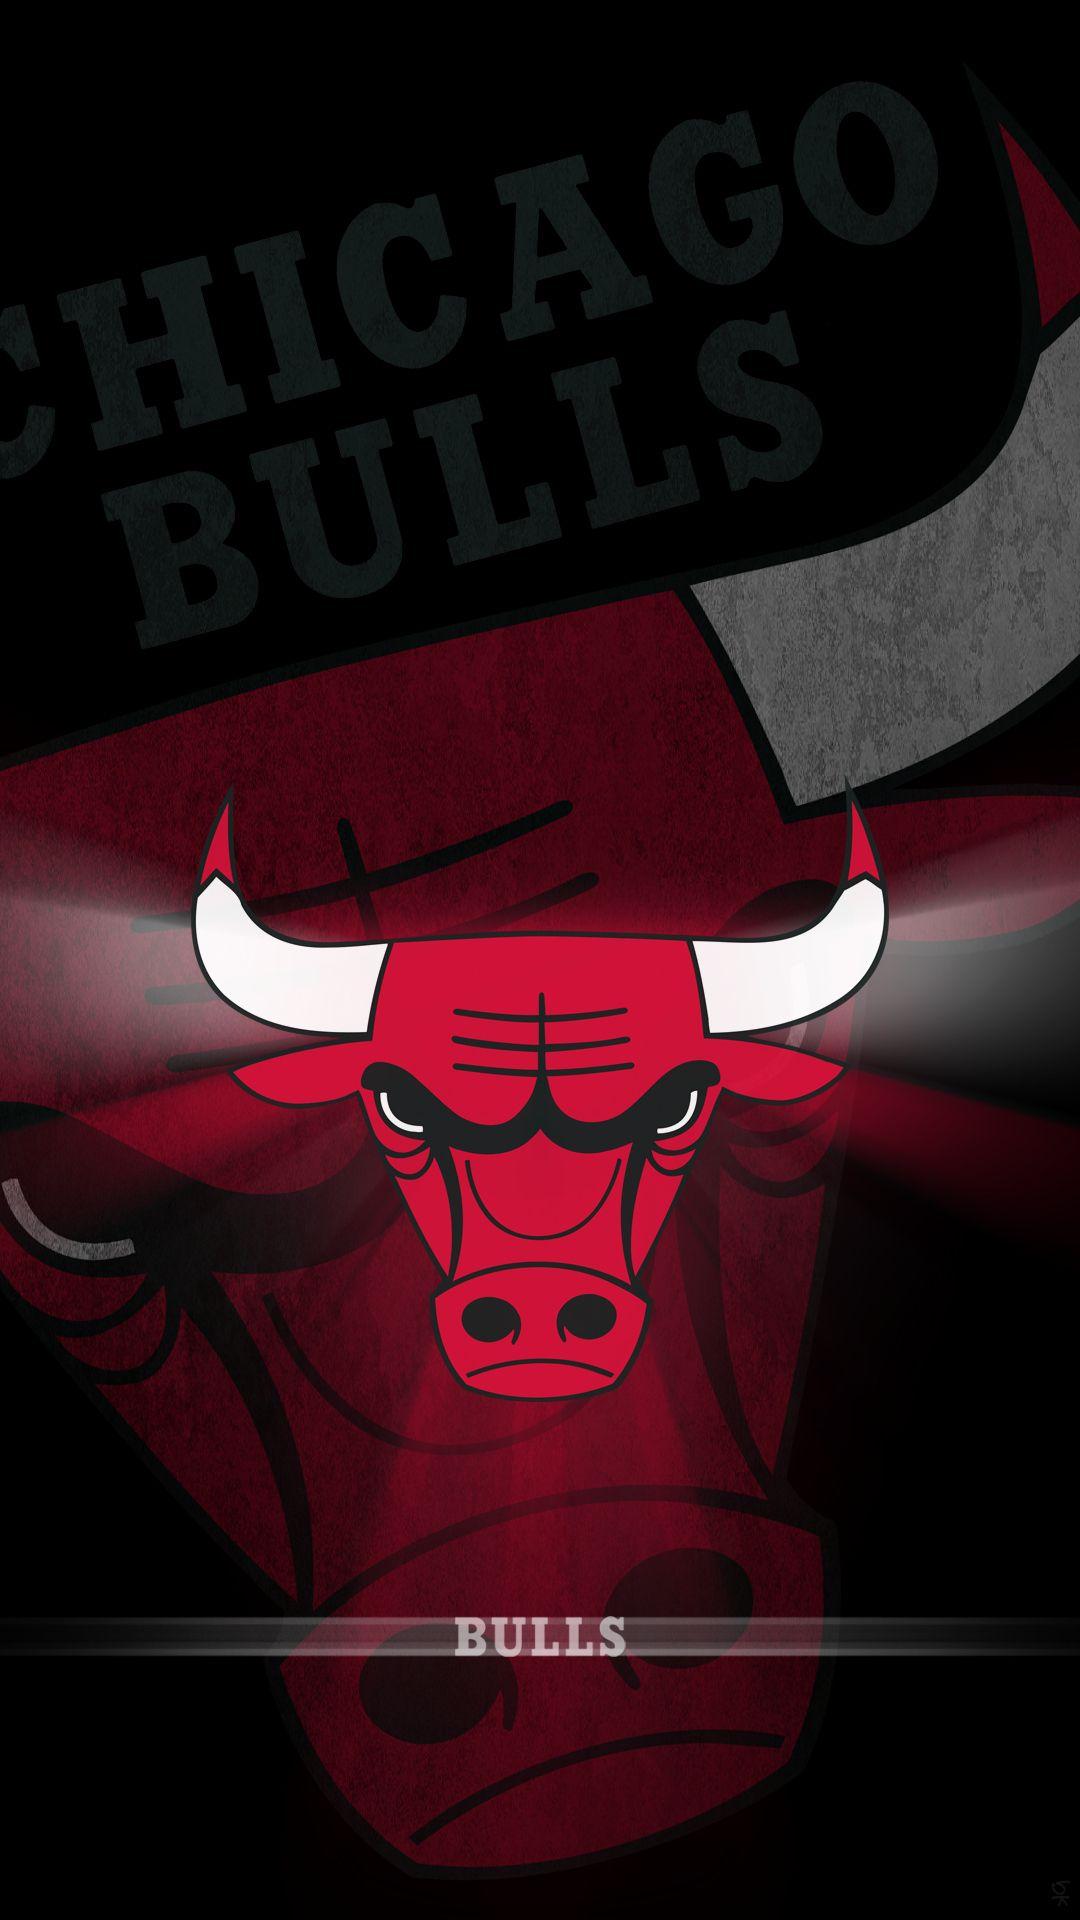 Awesome Bulls Wallpaper Graphics Wallpaper Collection. HD